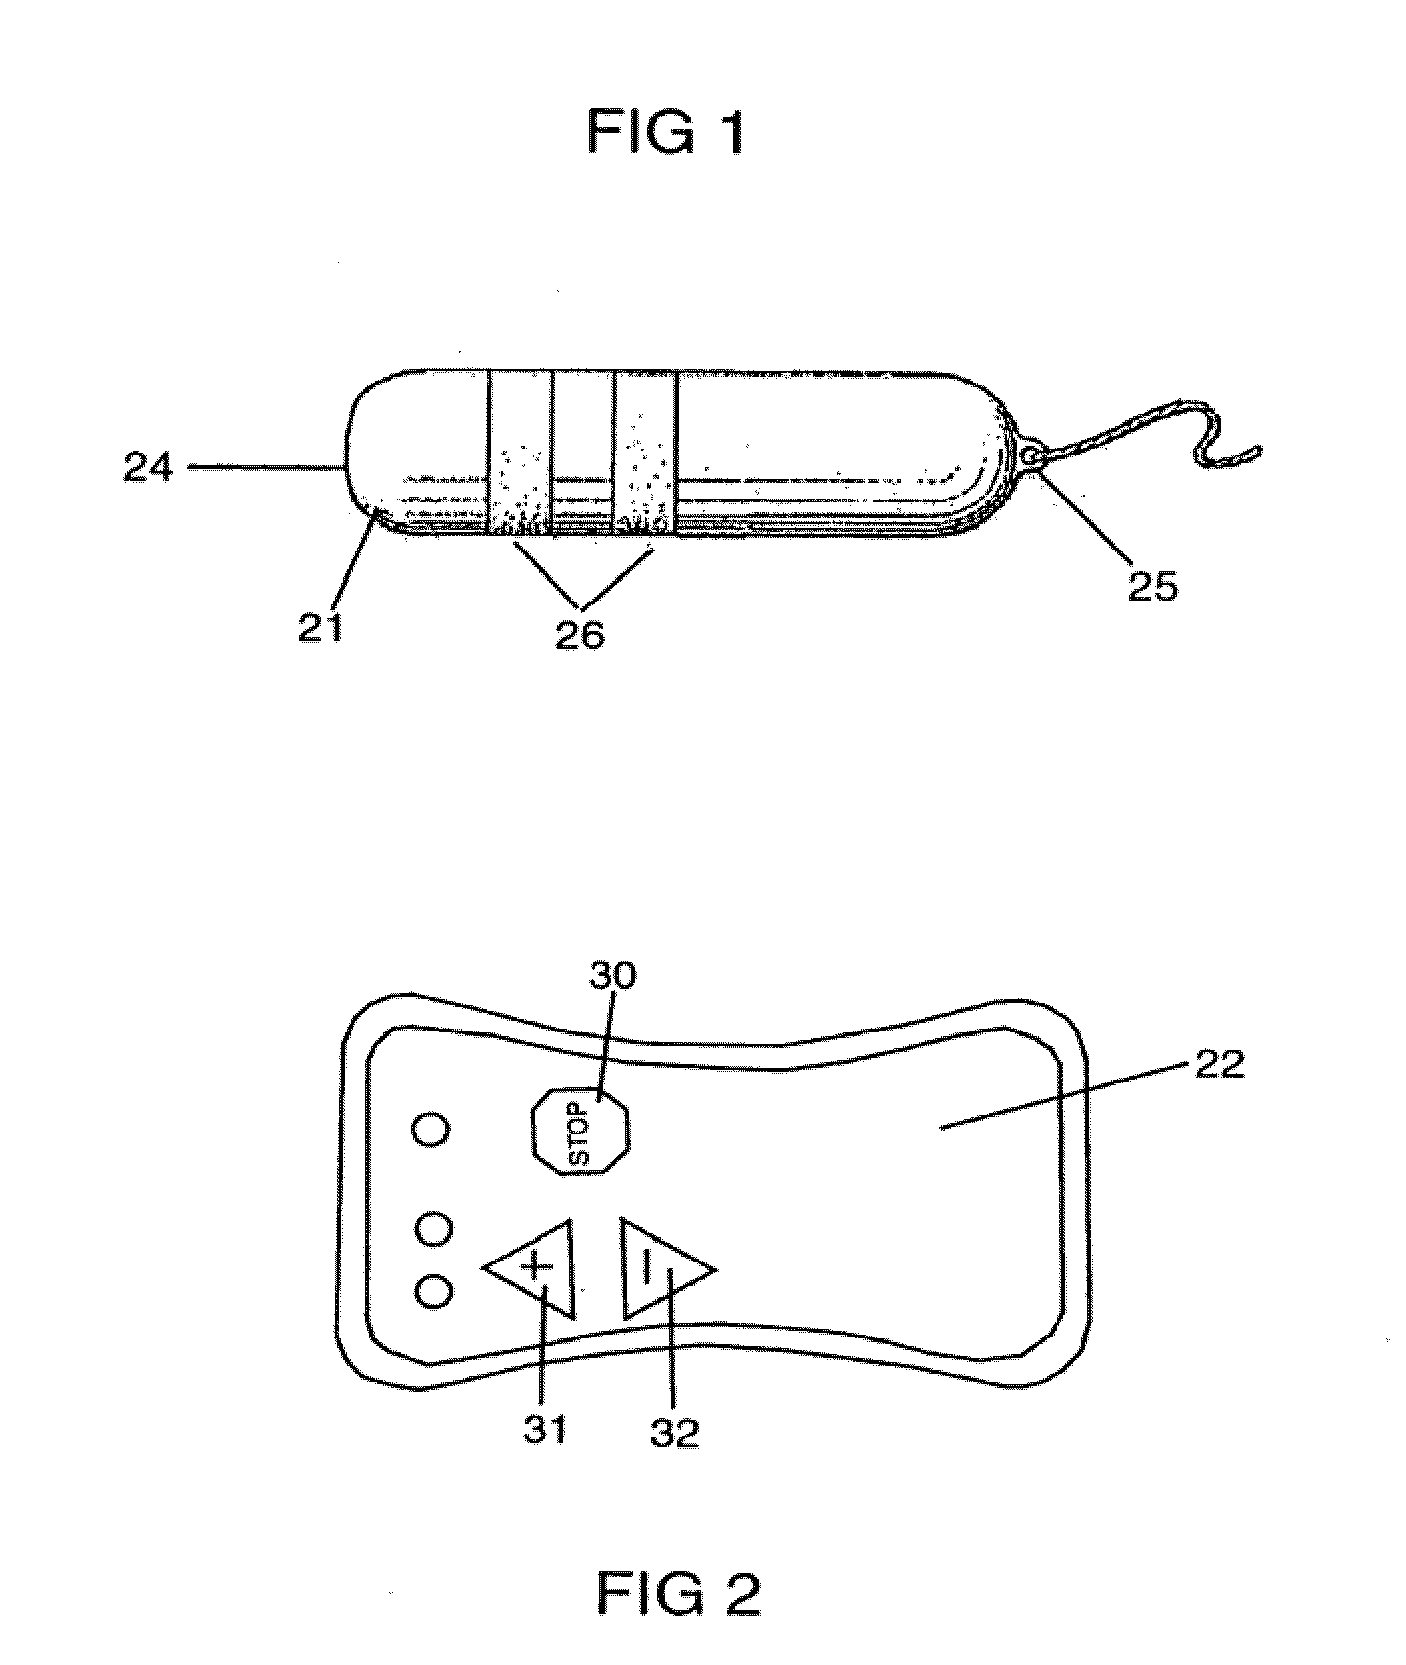 System and Method For Transducing,  Sensing, or Affecting Vaginal or Body Conditions, and/or Stimulating Perineal Musculature and Nerves using  2-Way Wireless Communications